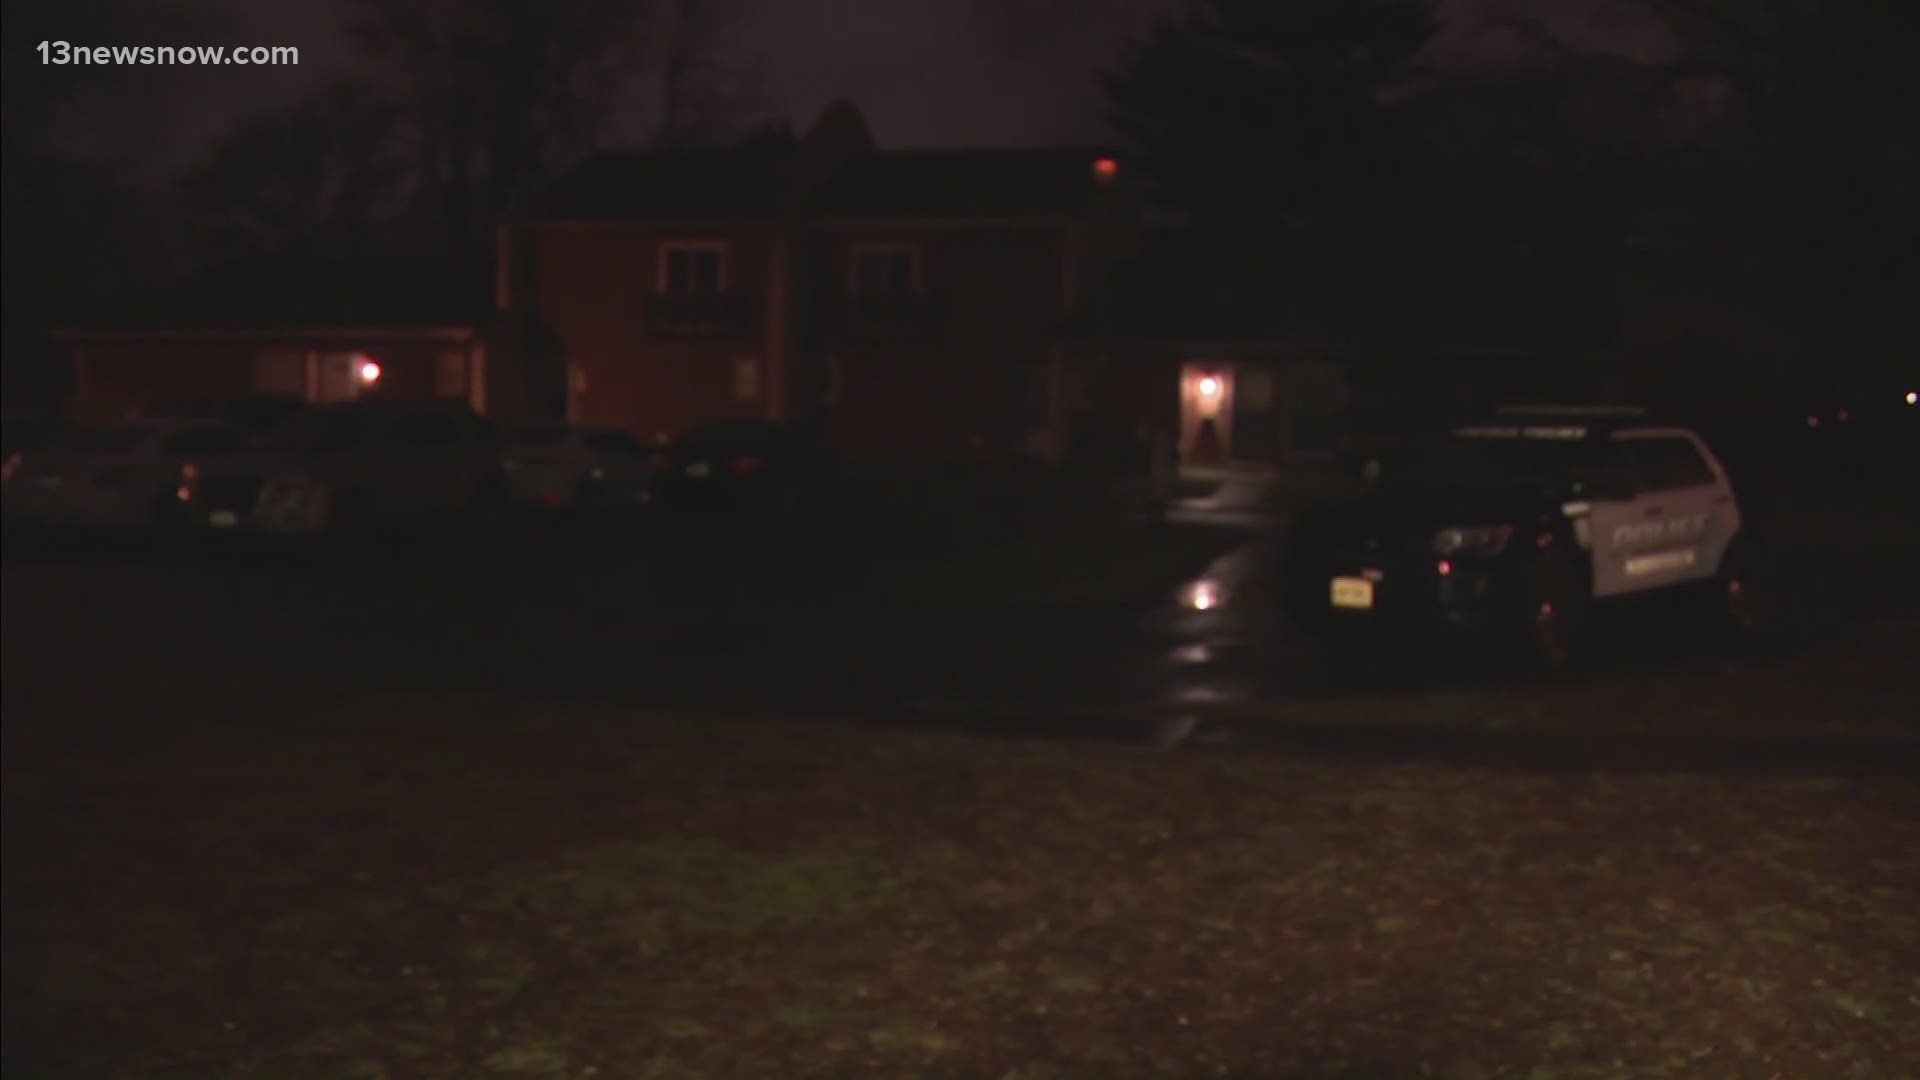 The person was taken to the hospital after a stabbing on East Tanners Creek Drive.